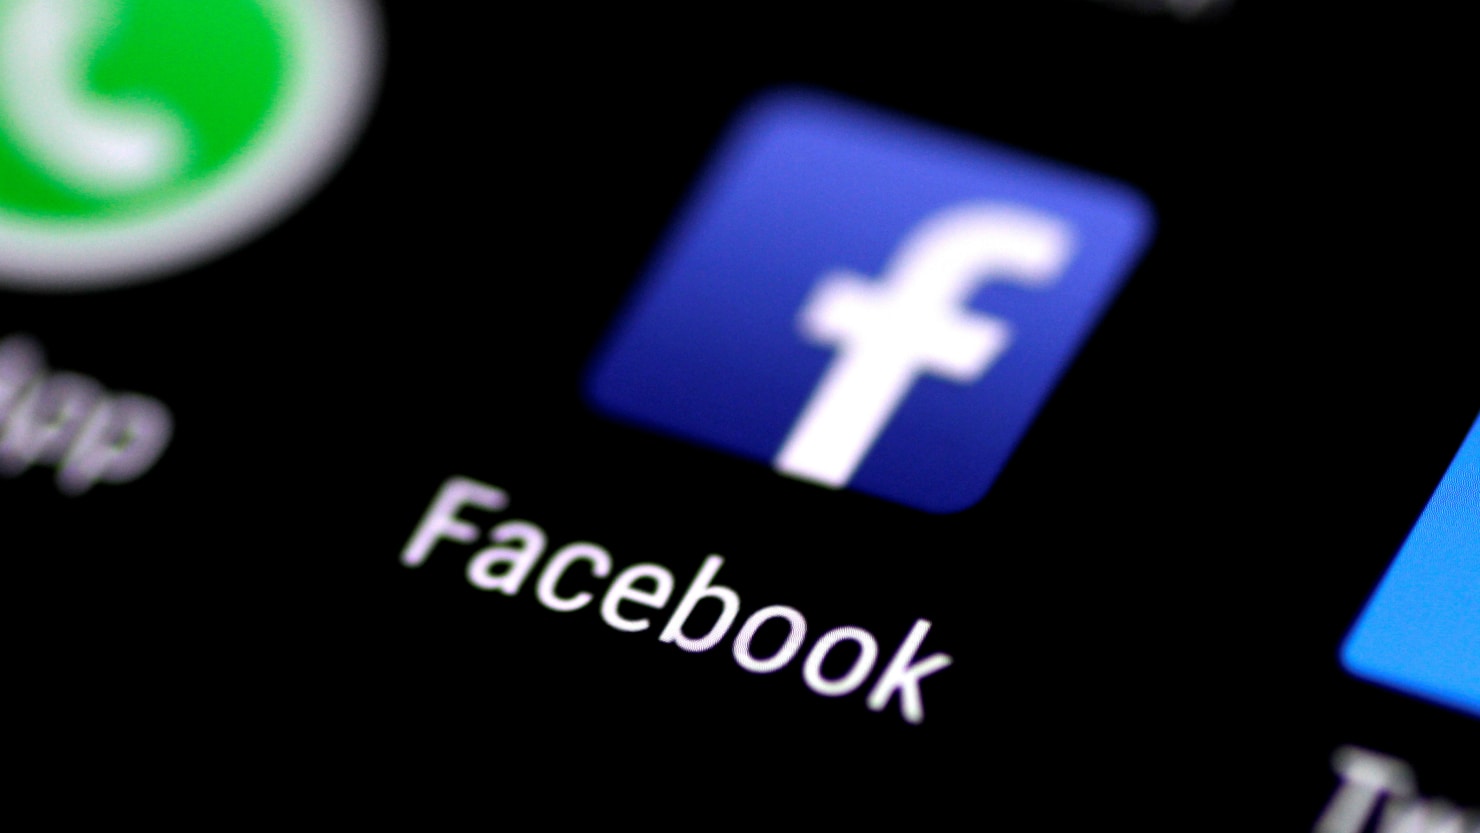 Facebook is selling user data, even as Facebook does not sell user data